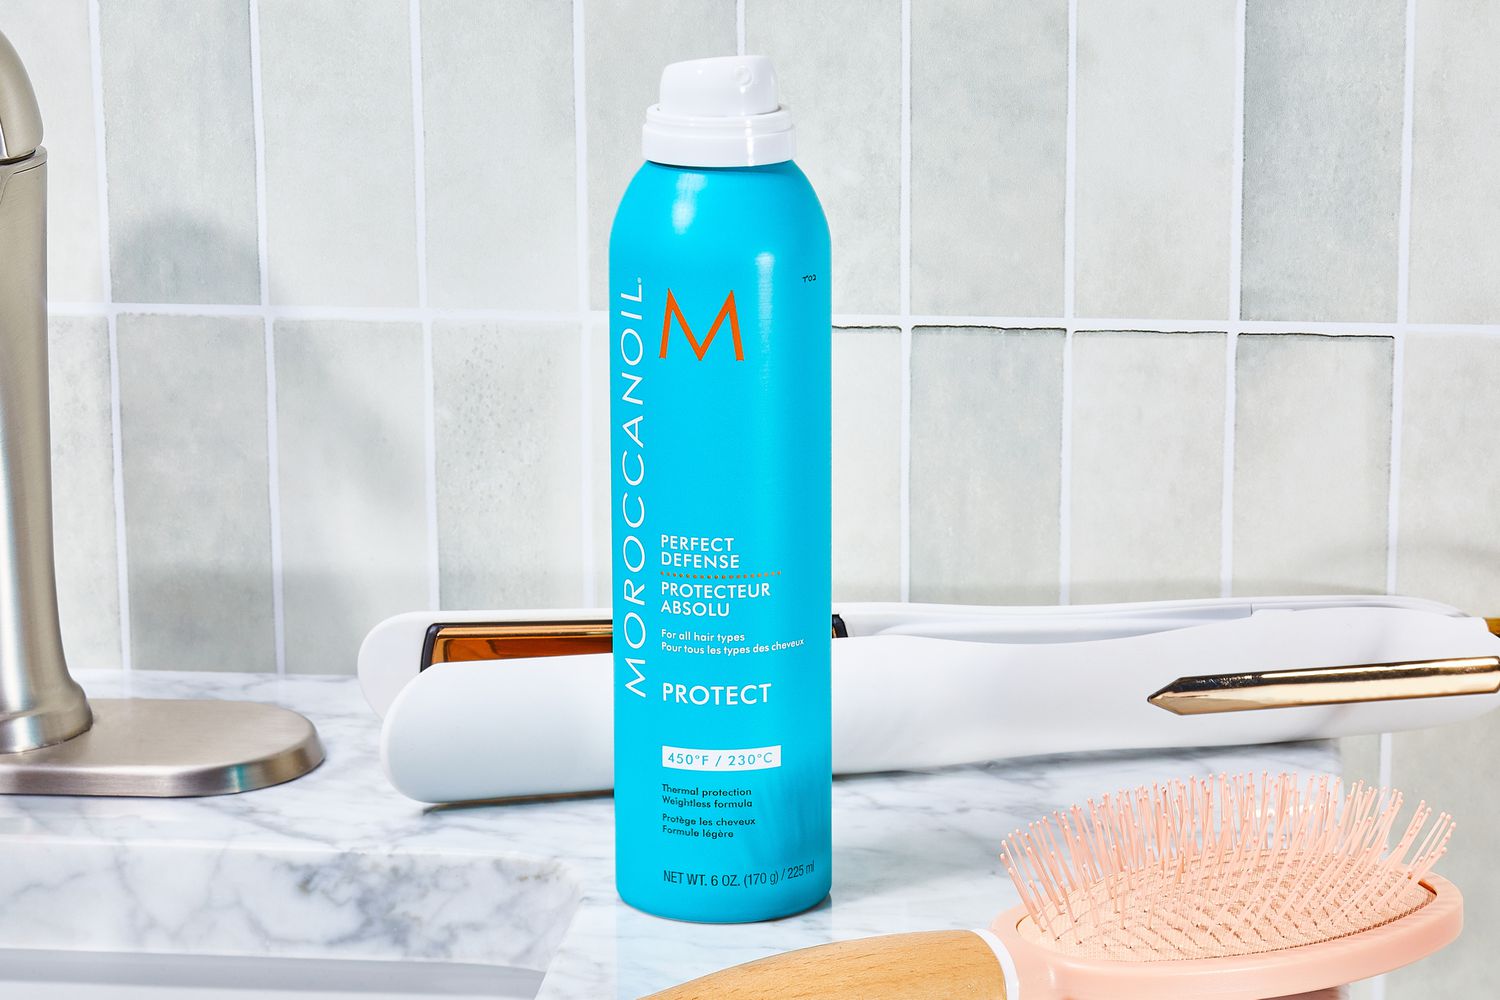 Moroccanoil Perfect Defense Heat Protectant bottle sits on bathroom counter with hair styling tools